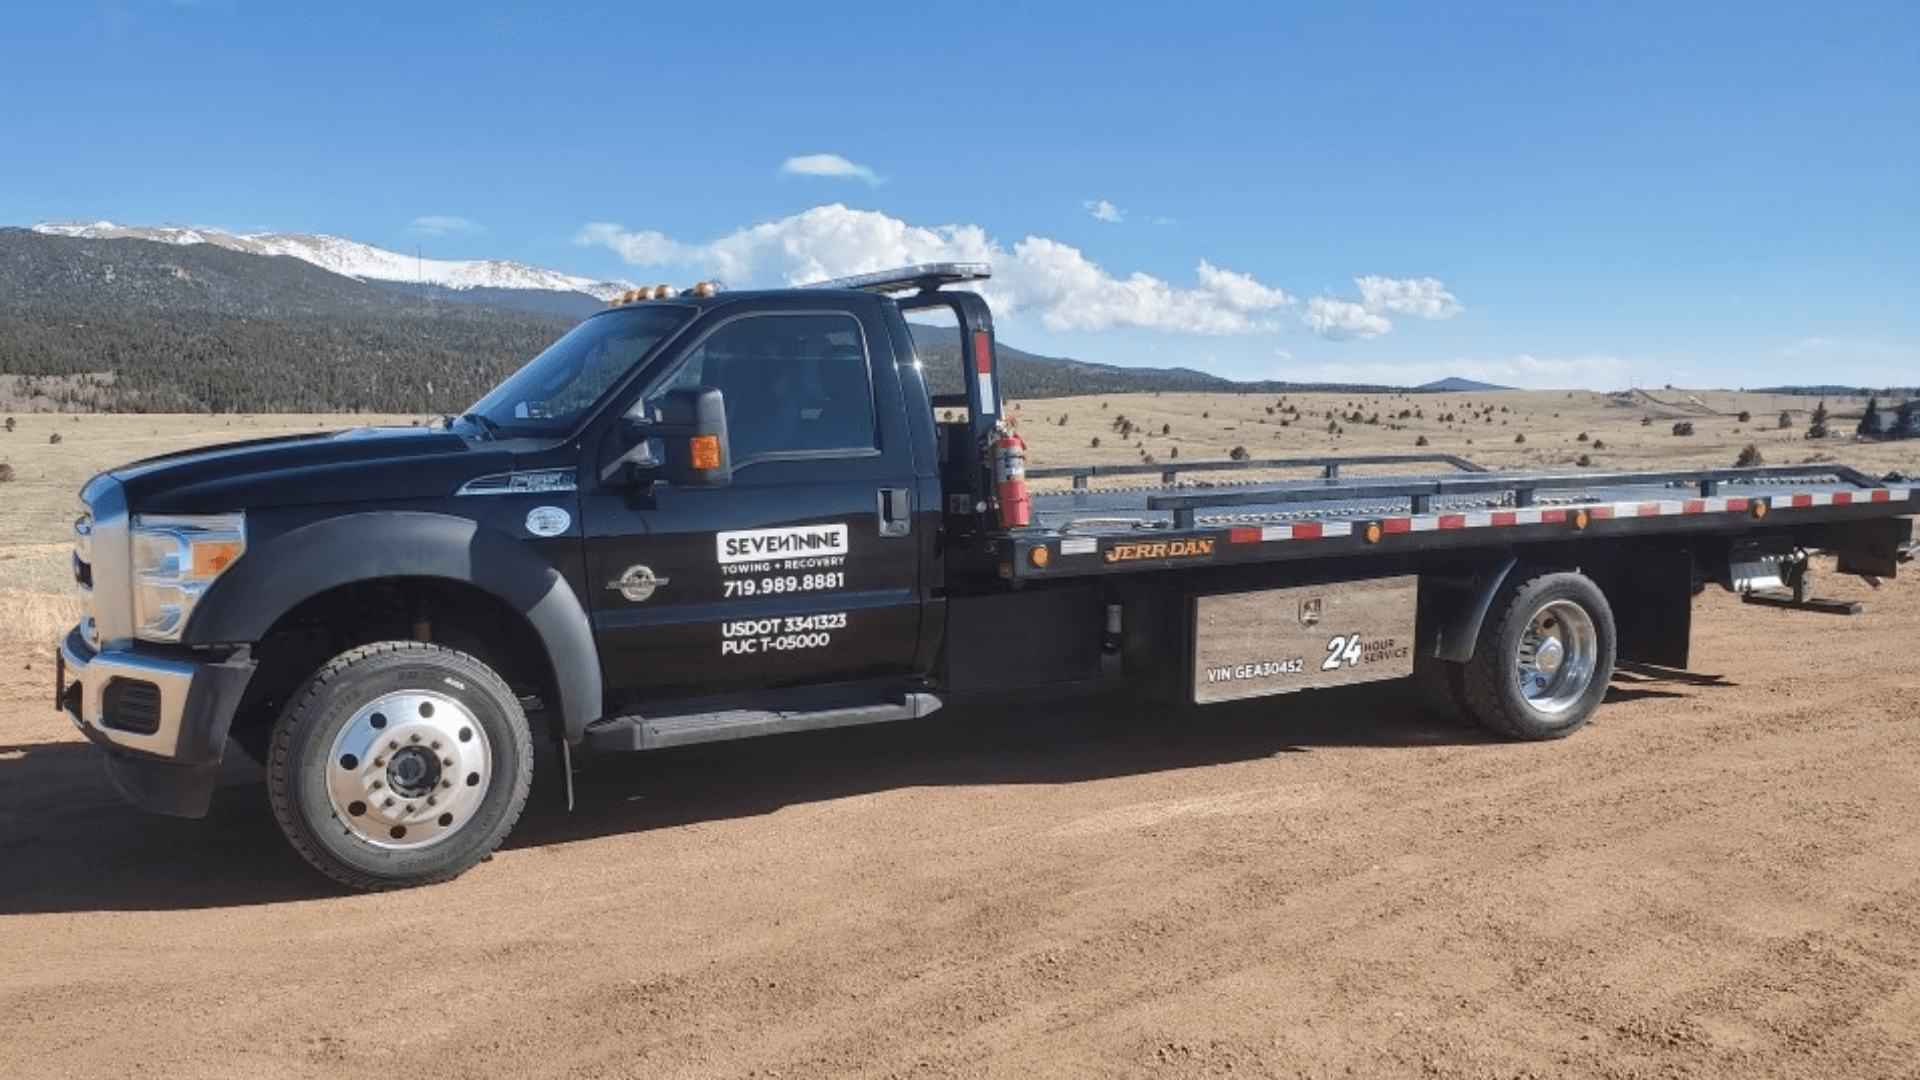 Seven1nine Towing and Recovery